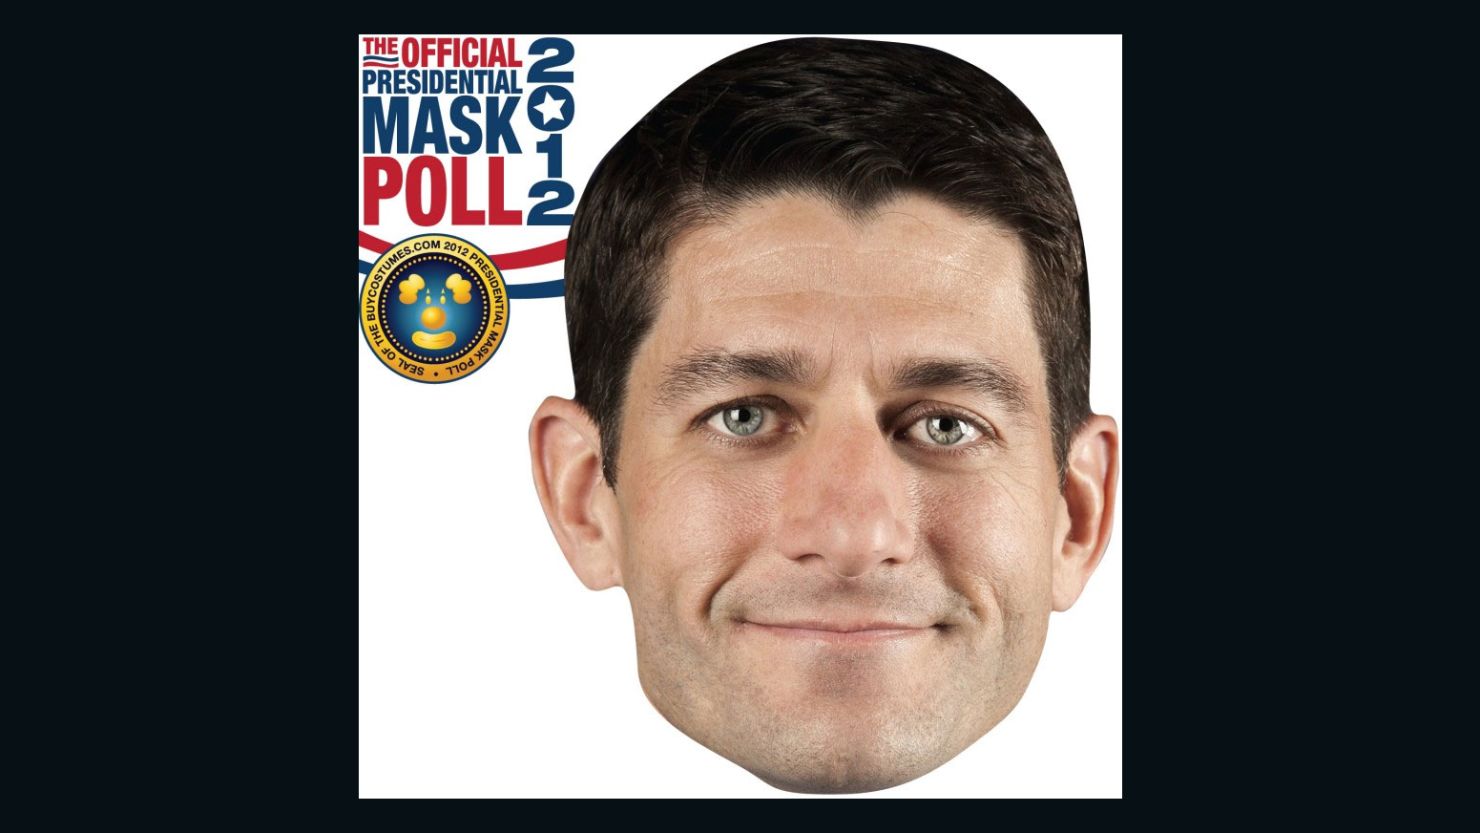 GOP delegates snapped photos of themselves wearing these Paul Ryan paper masks and posted them to Instagram.